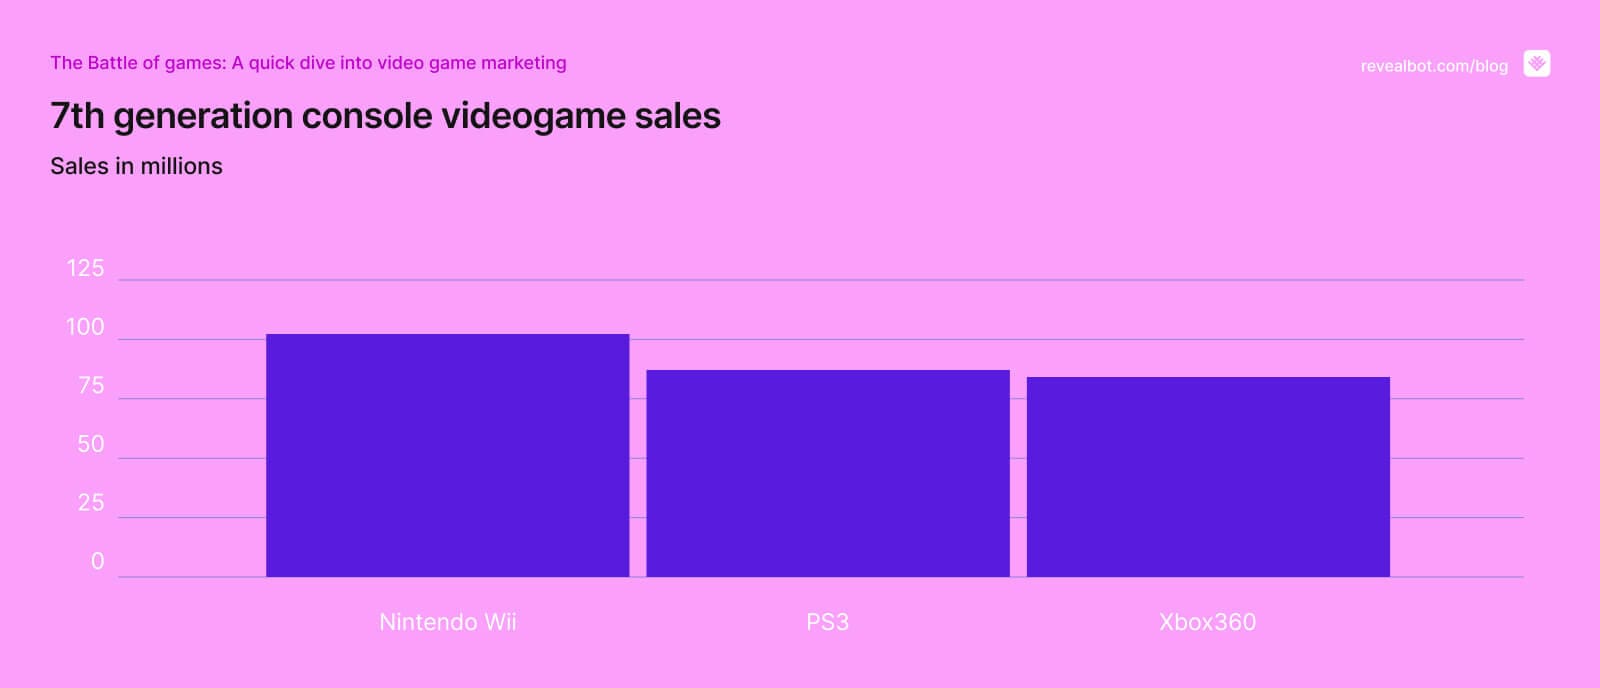 The Battle of games: A quick dive into video game marketing